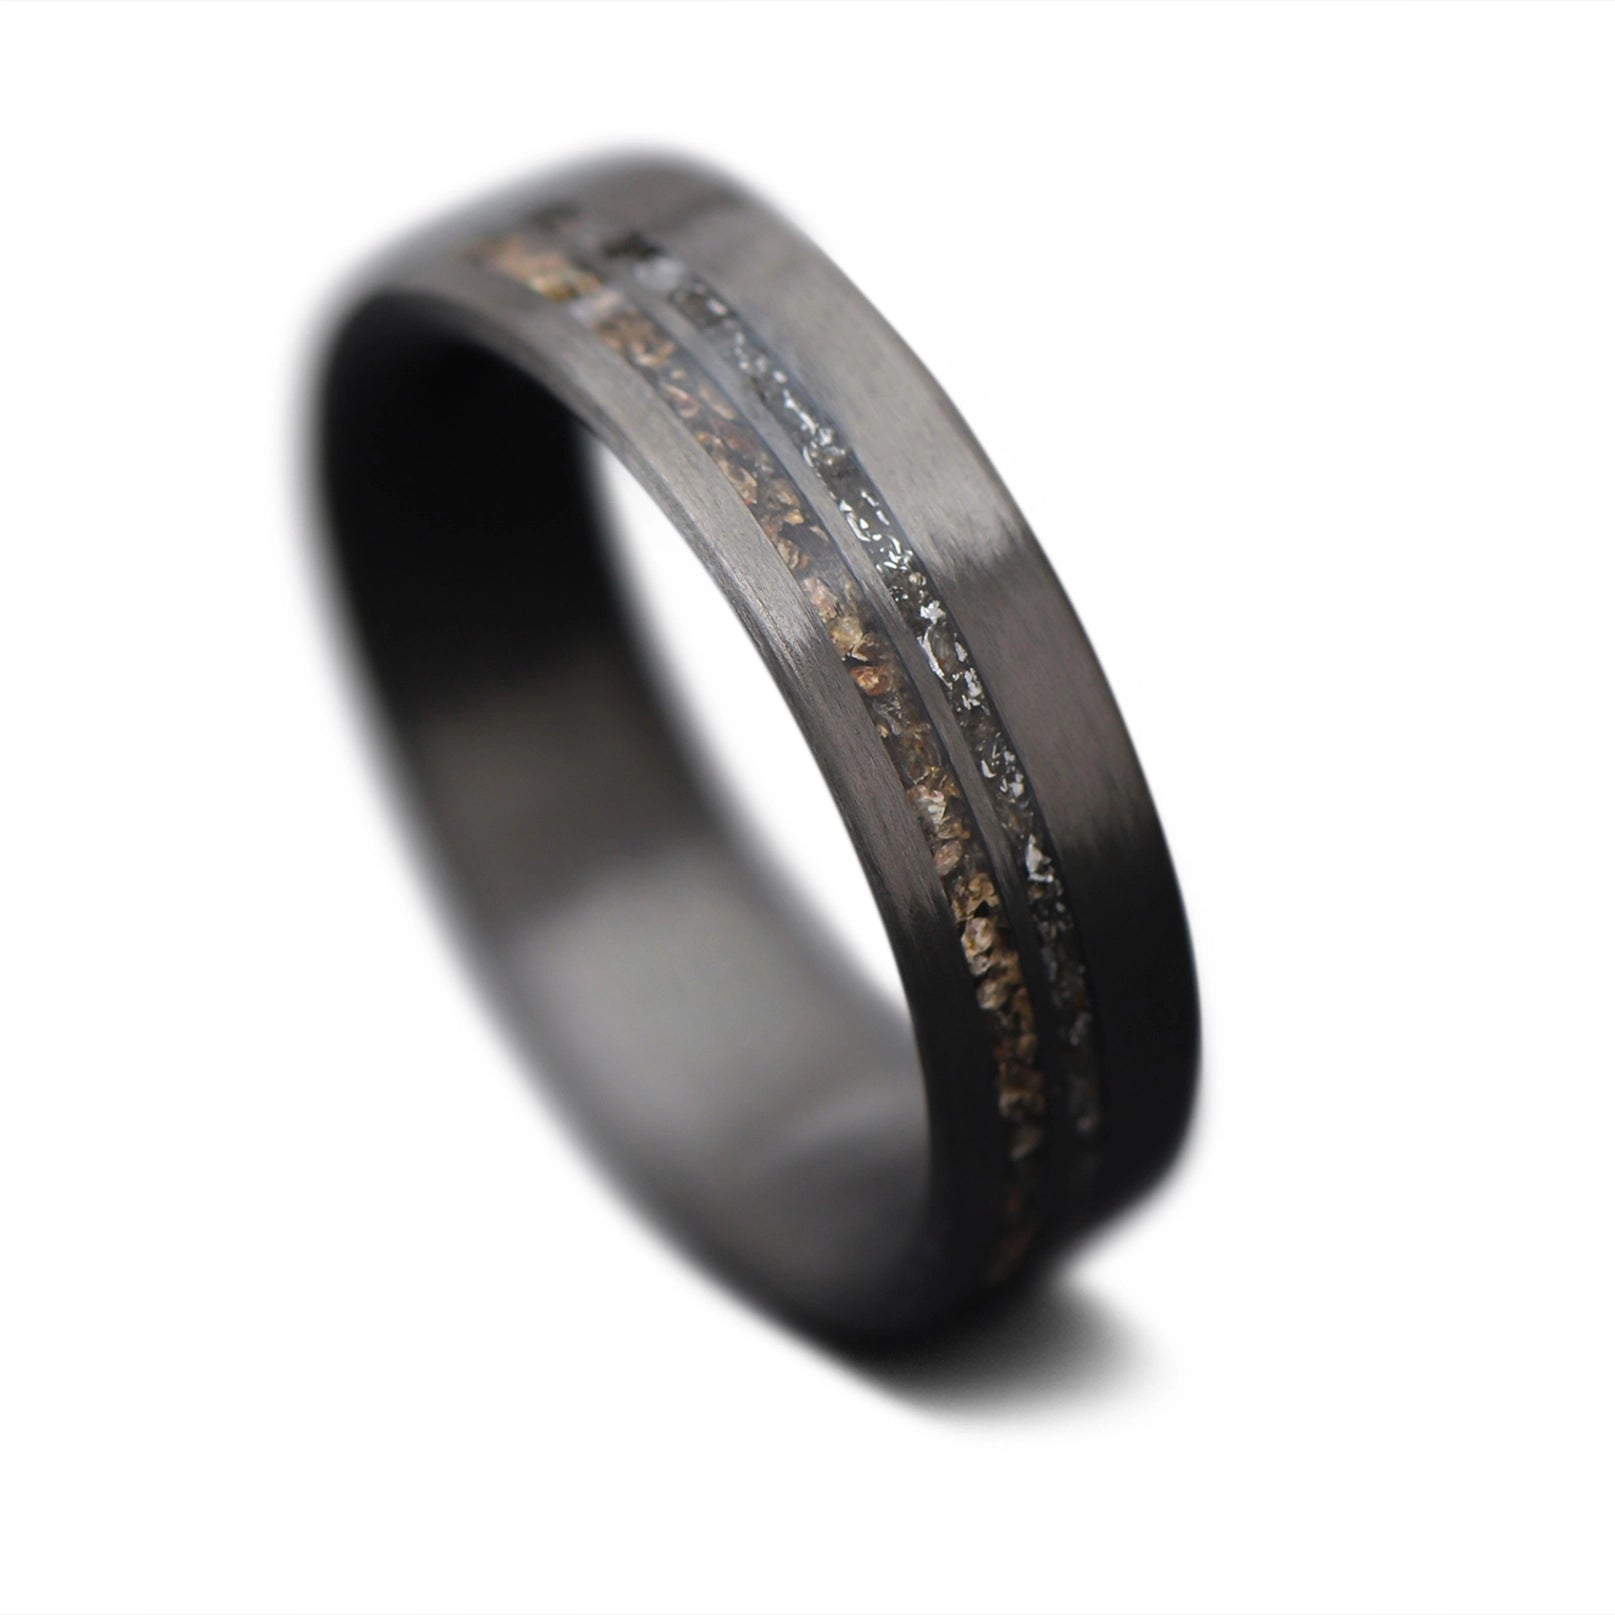 CarbonUni Core Ring with Crushed T-Rex, Meteorite inlay and black finish polished, 7mm -THE INNOVATOR